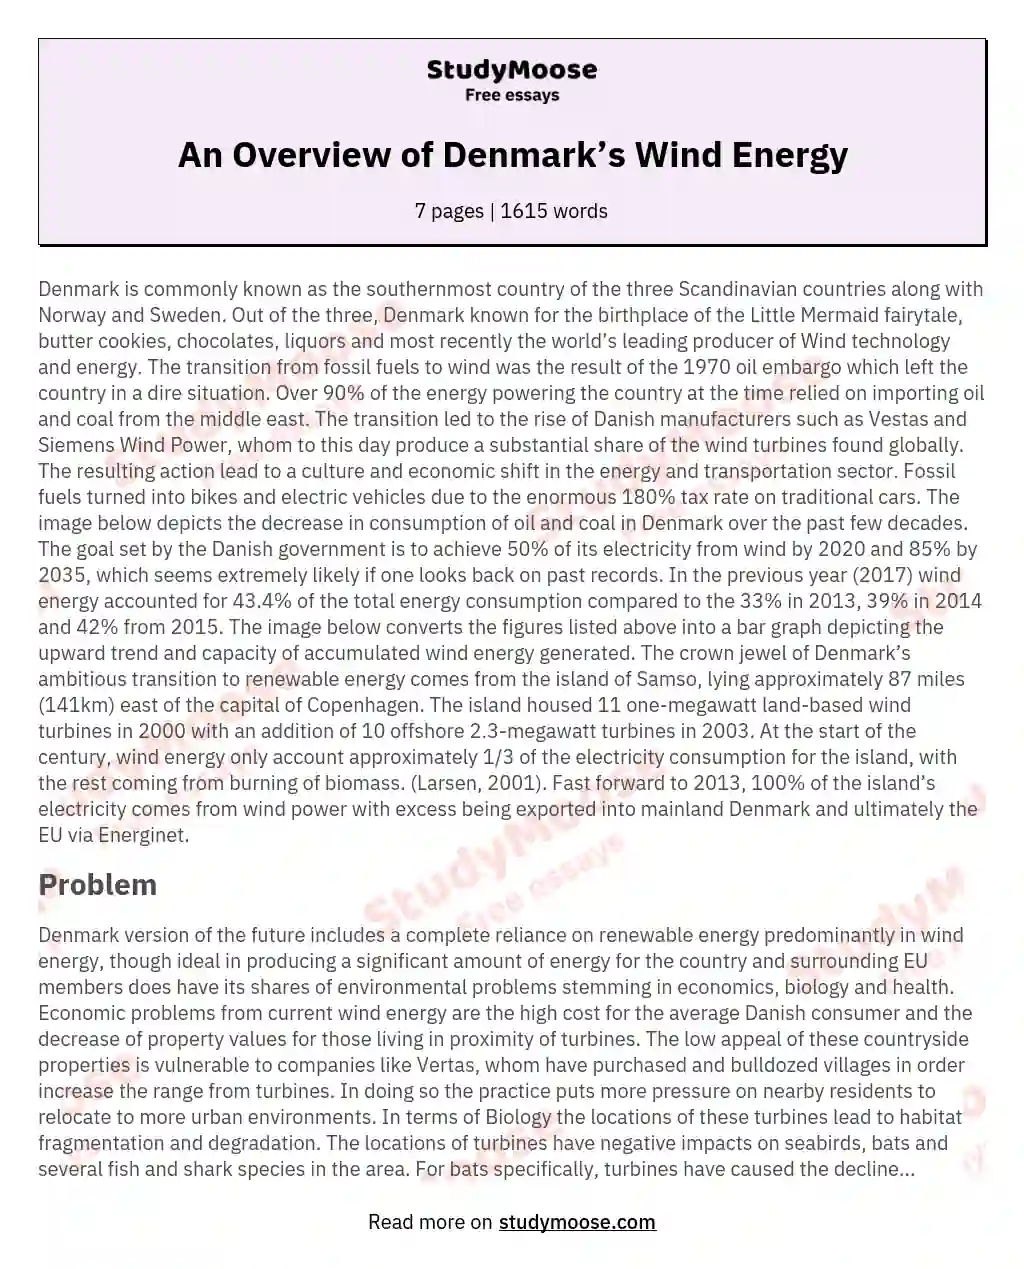 An Overview of Denmark’s Wind Energy essay